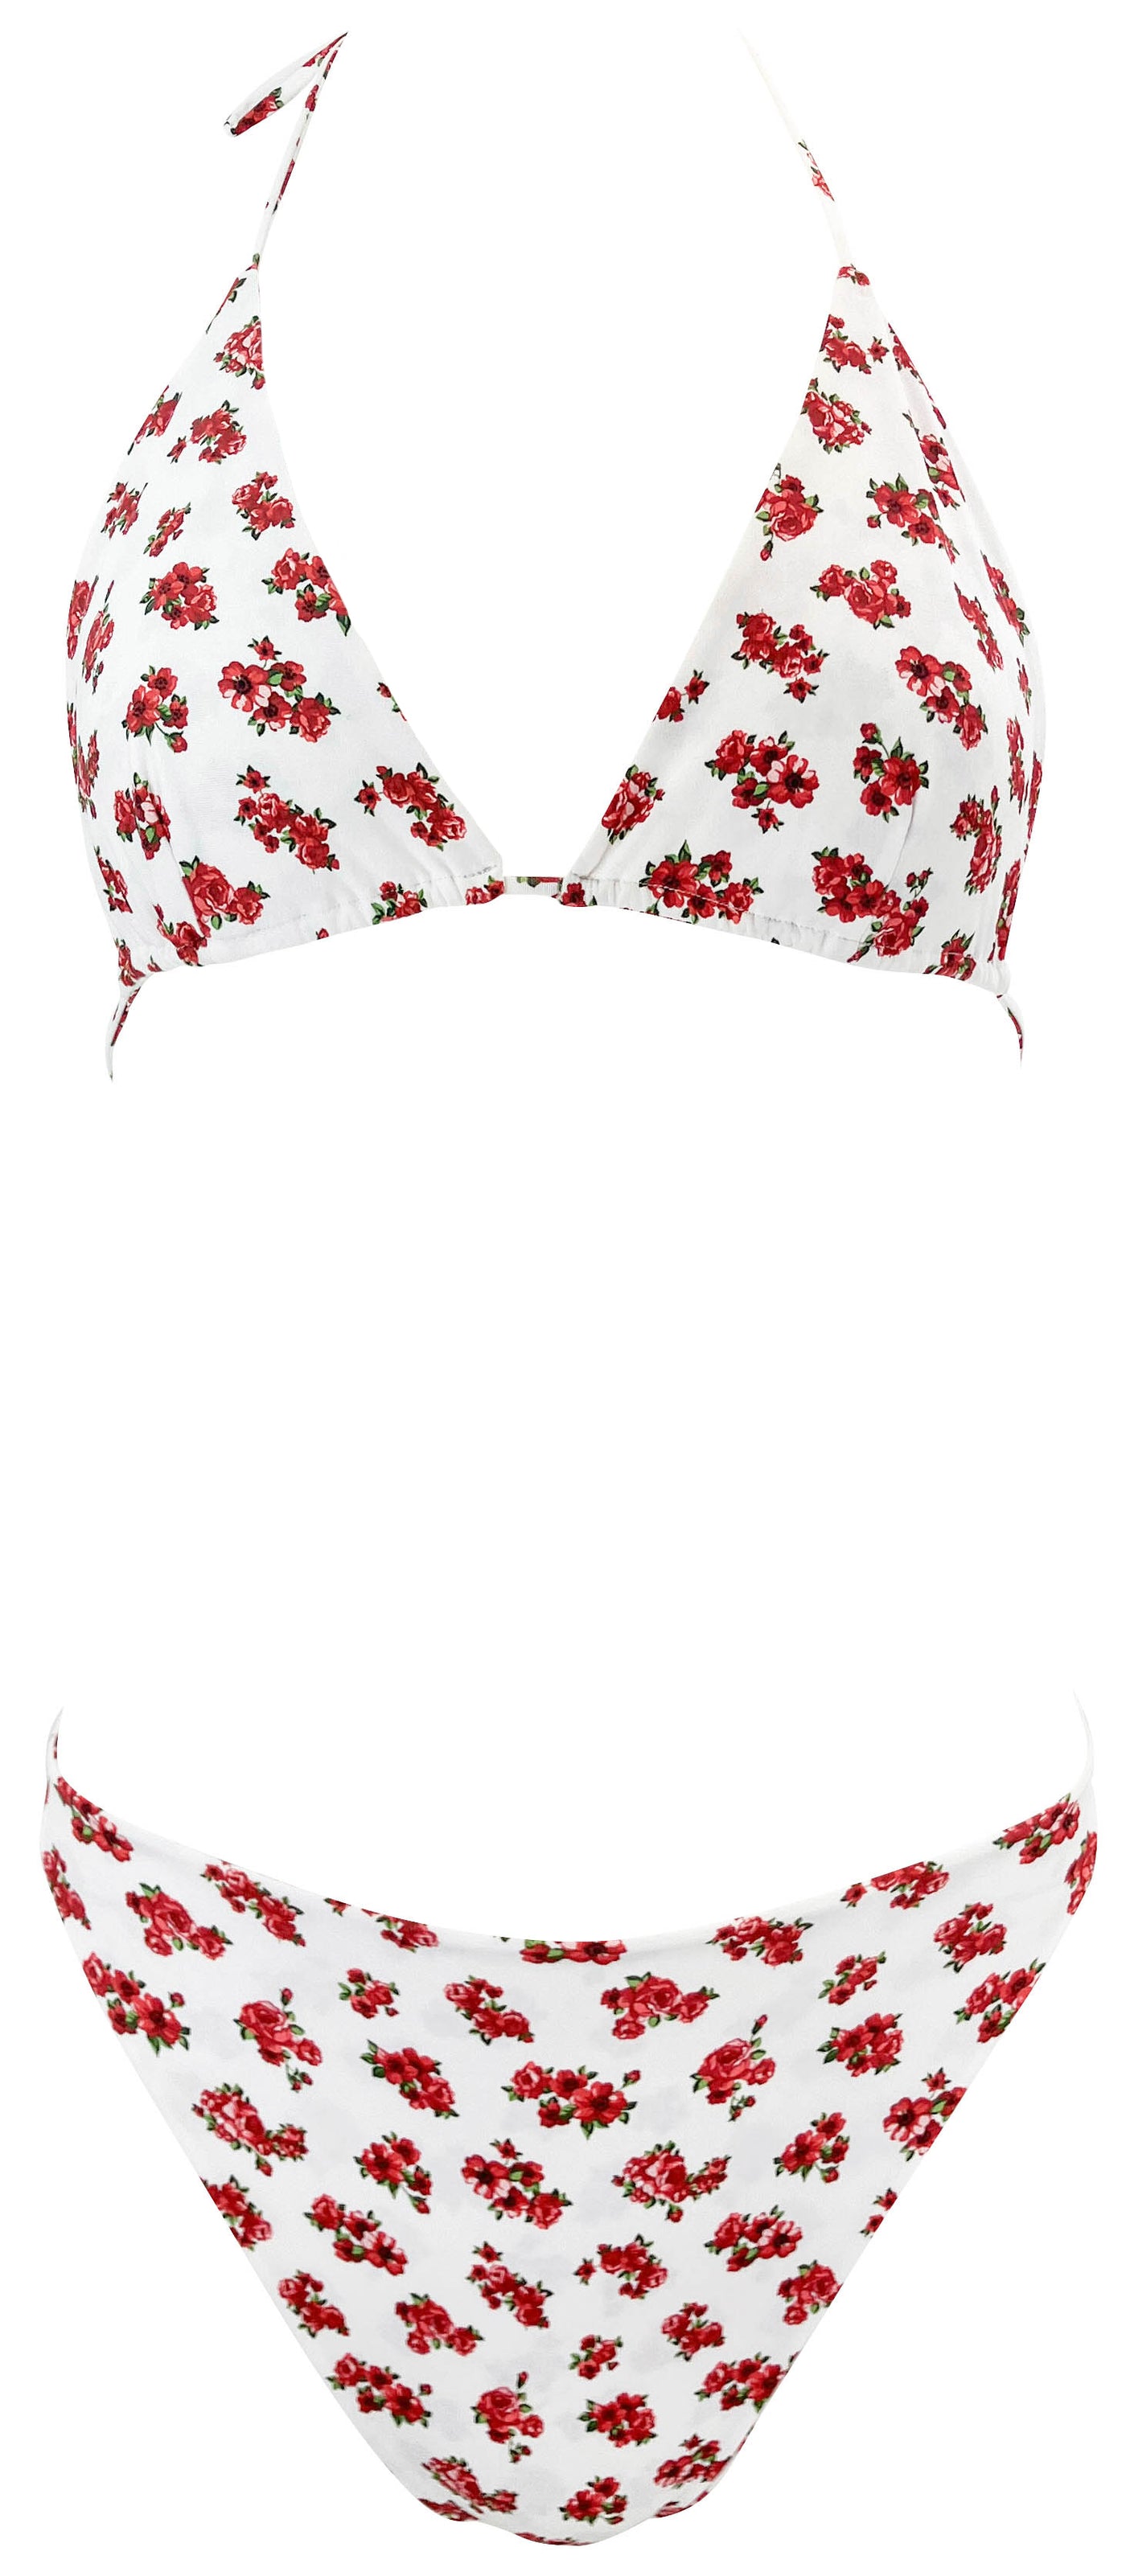 Magda Butrym Floral Print Bikini in White and Red - Discounts on Magda Butrym at UAL